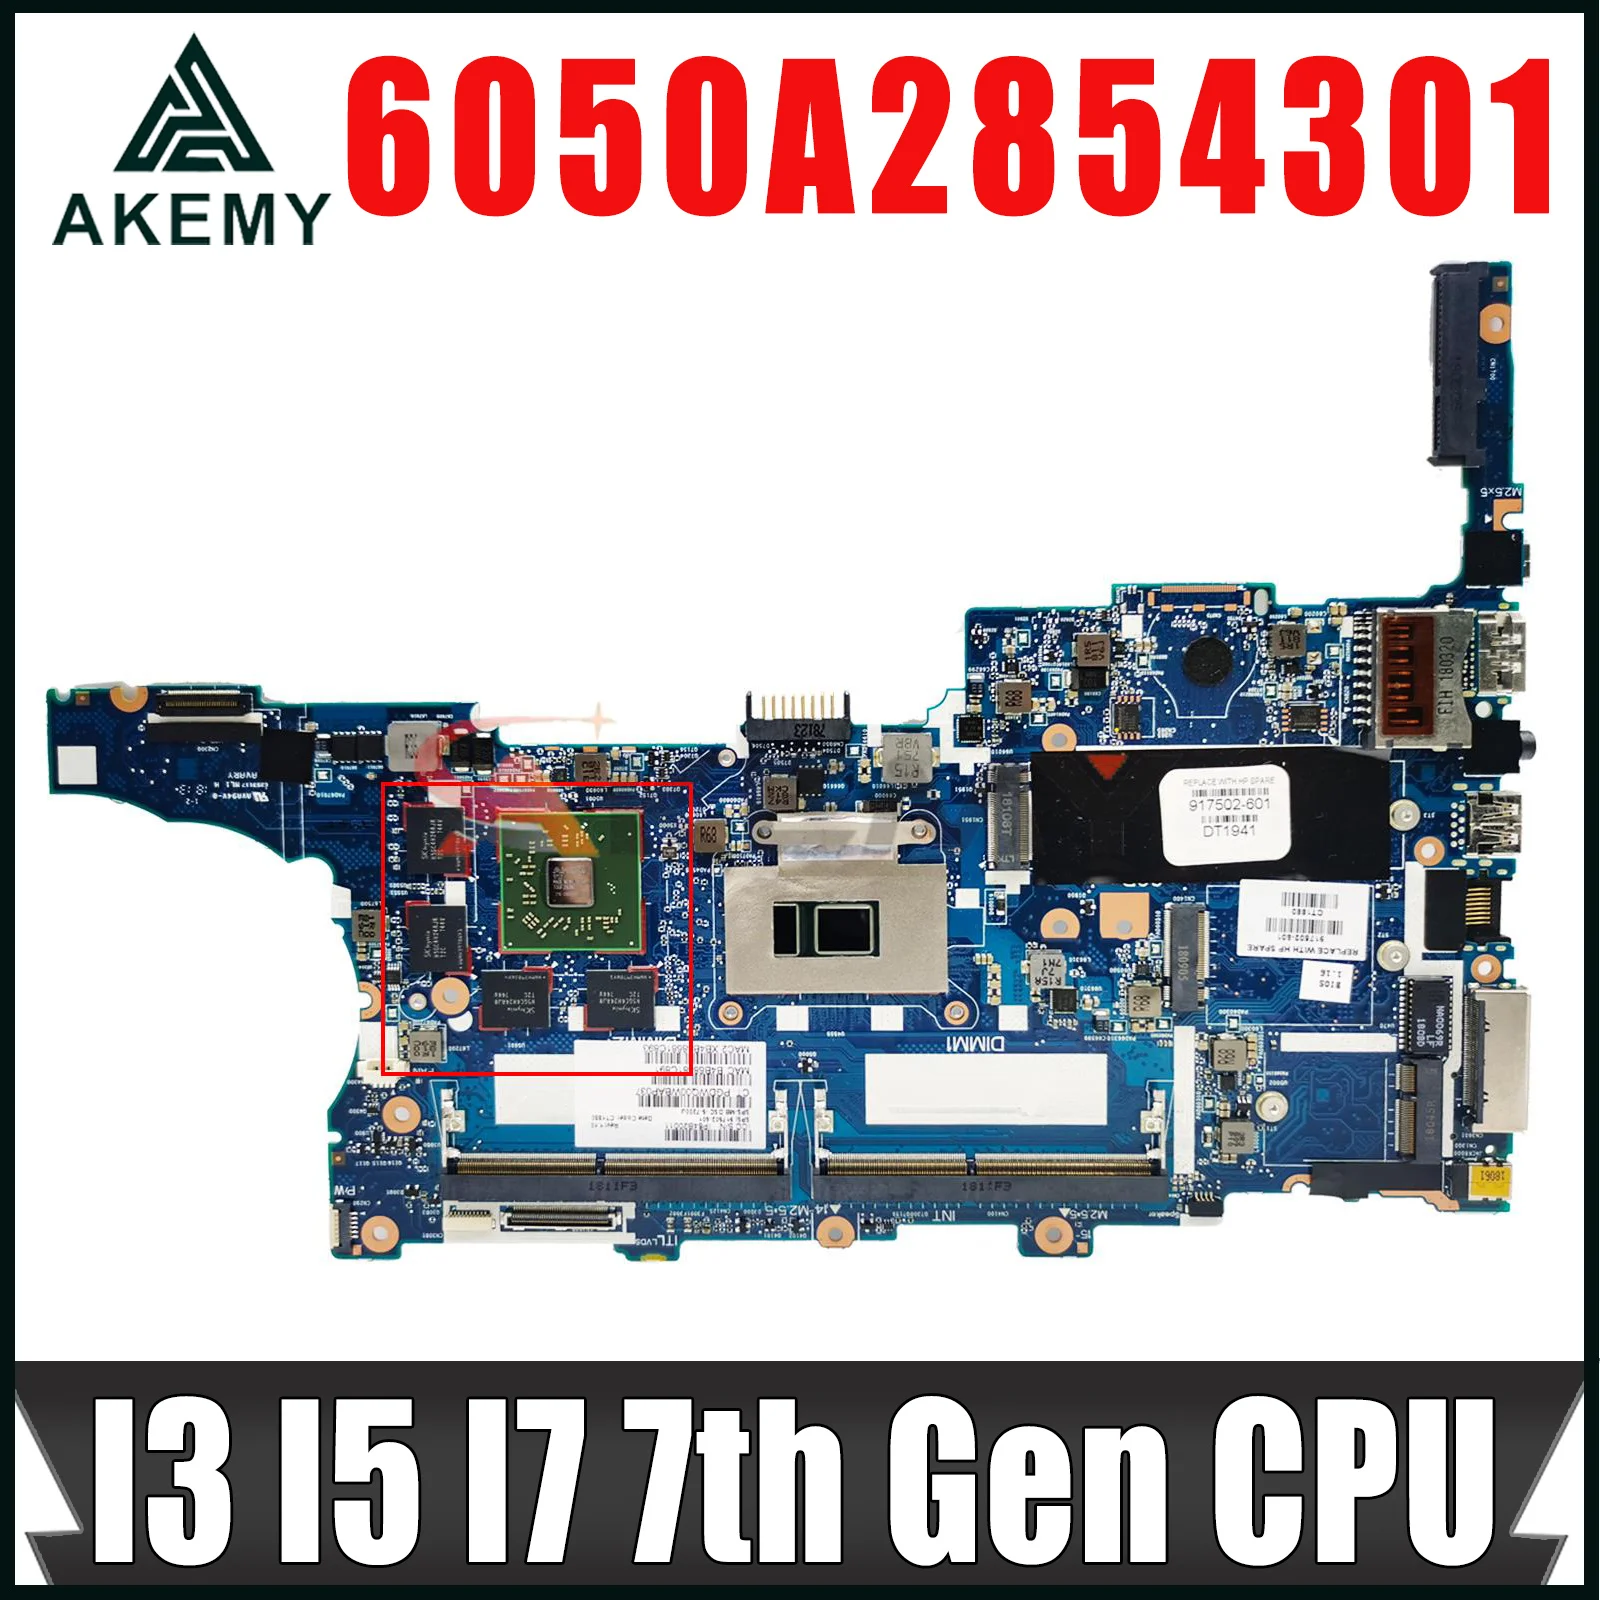 

6050A2854301 Motherboard For HP EliteBook 850 G4 840 G4 Laptop Motherboard Mainboard With I3 I5 I7 7th Gen CPU 216-0868010 GPU